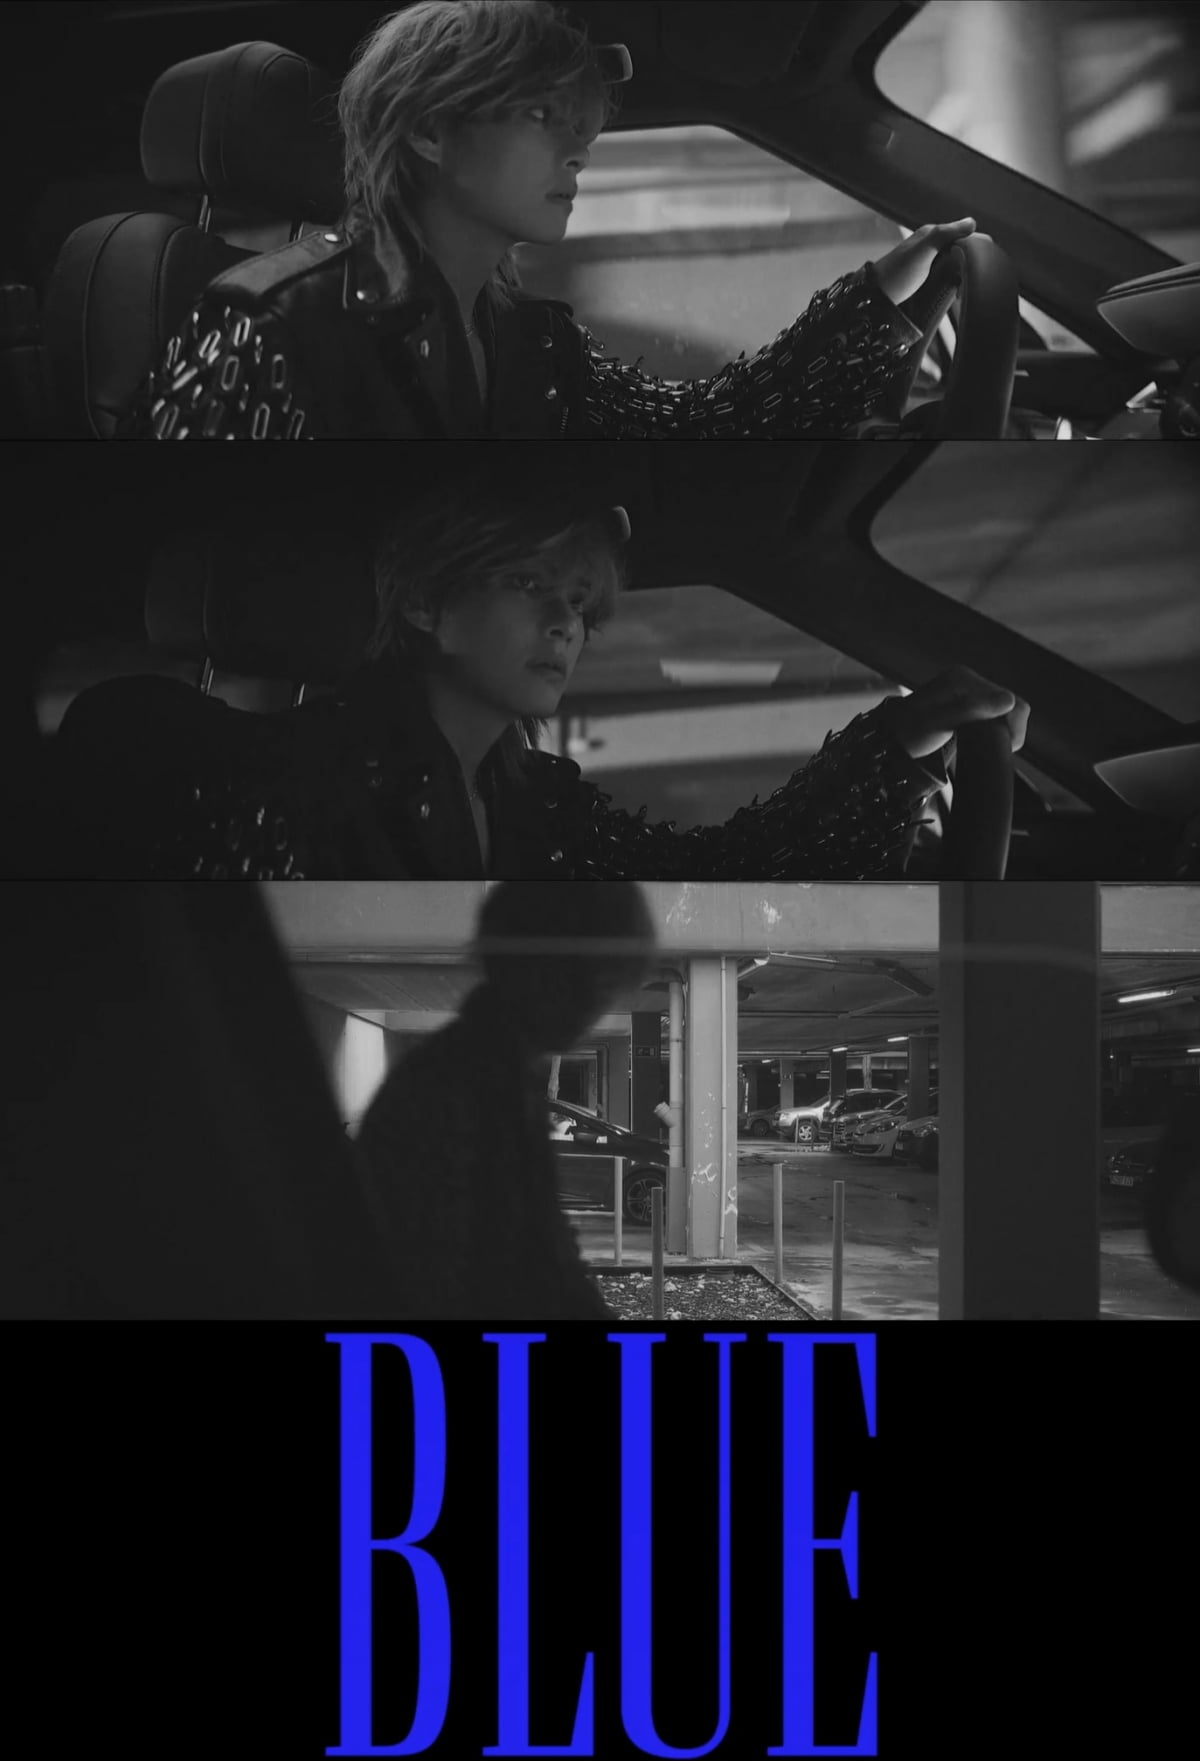 V releases the contents of his first solo album 'Layover'... Today (25th) is the 2nd teaser for 'Blue' MV